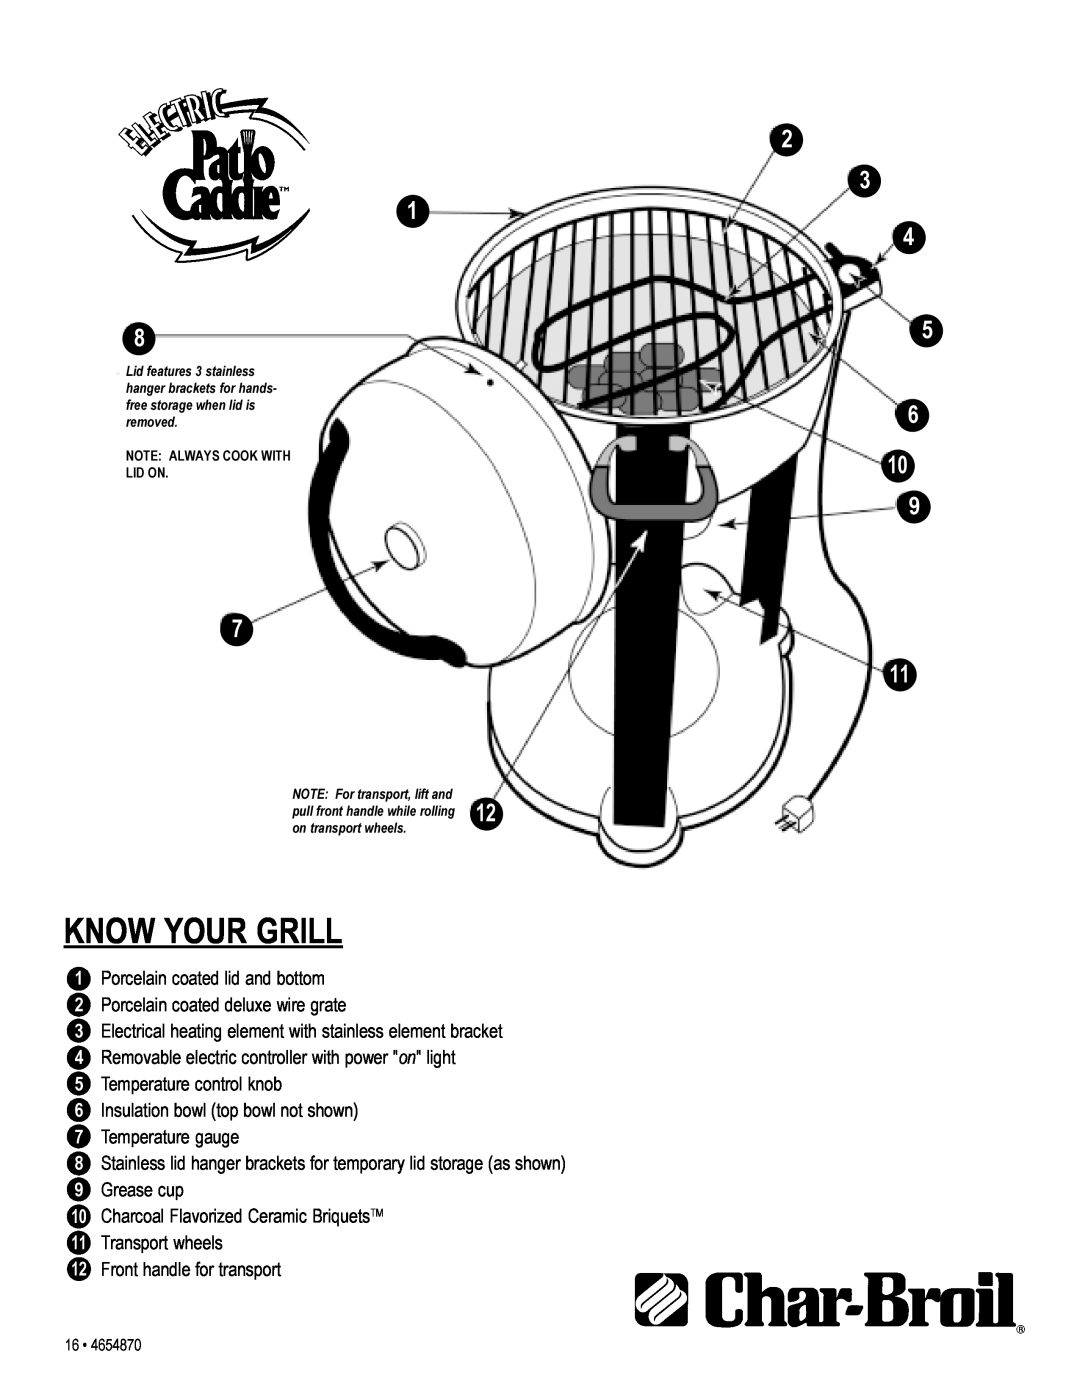 Char-Broil 4654870 manual 2 3, Know Your Grill 